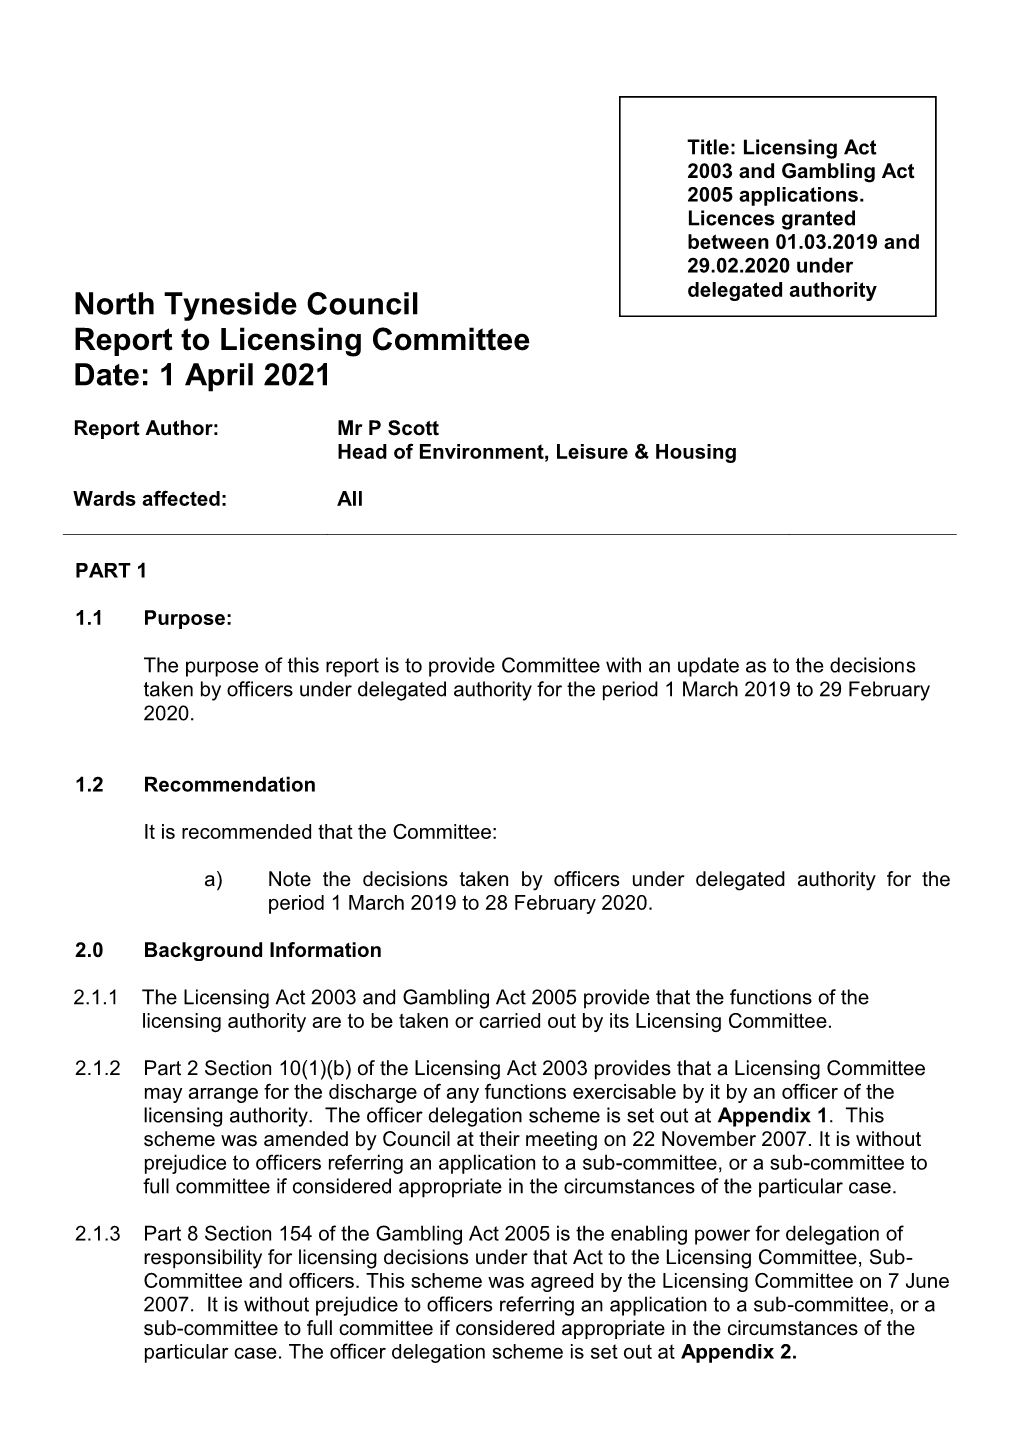 North Tyneside Council Report to Licensing Committee Date: 1 April